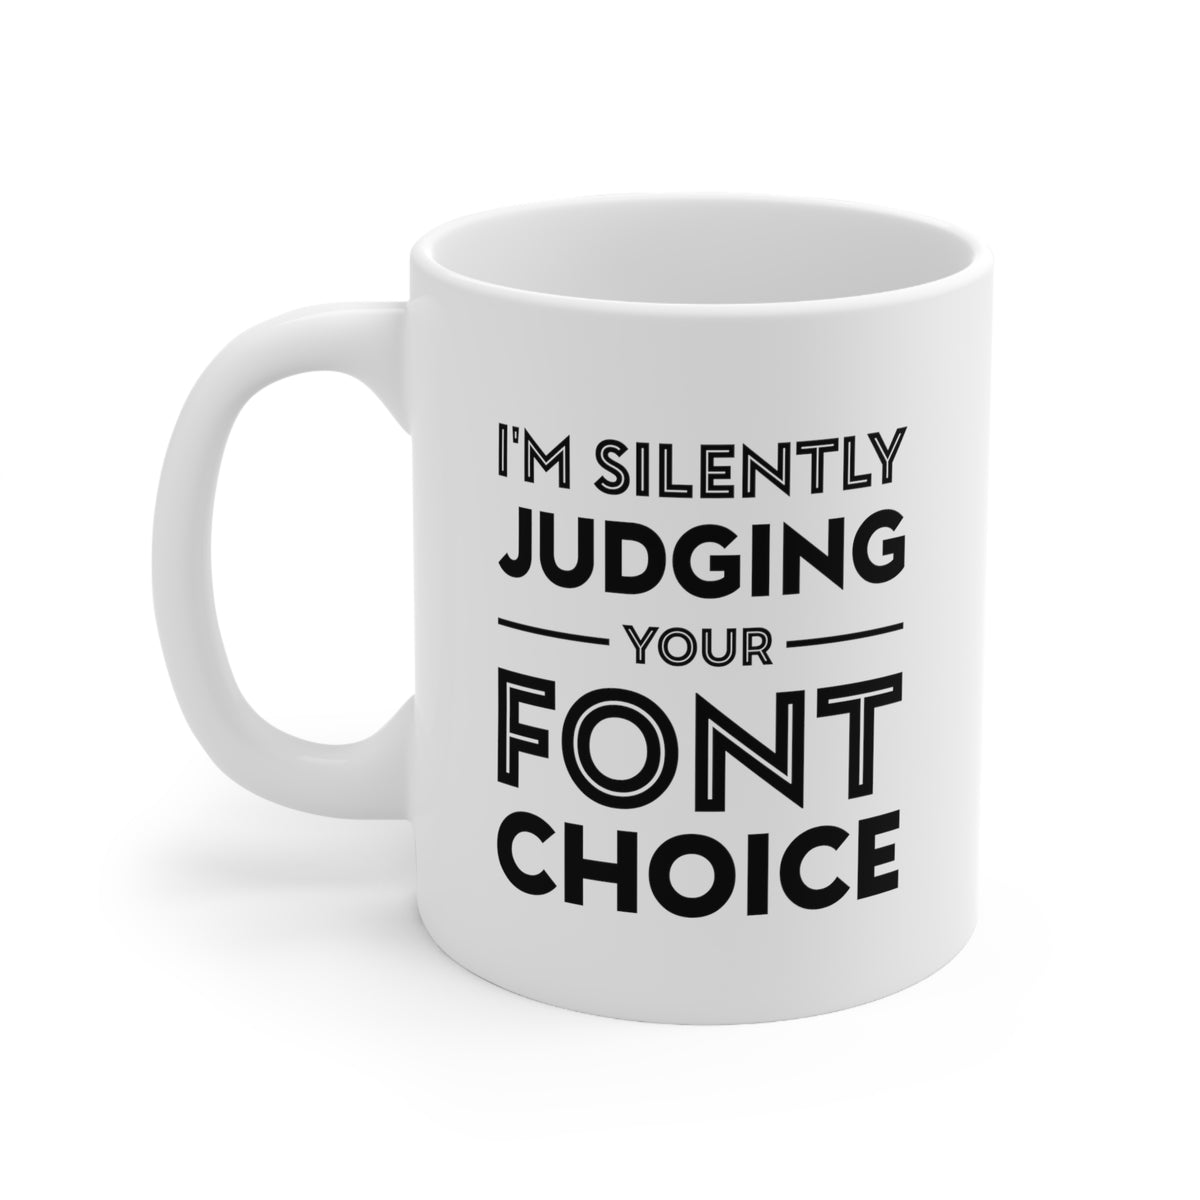 Designer Coffee Mug - I'm Silently Judging Your Font Choice Cup - Funny Sarcasm Gifts For Men Women